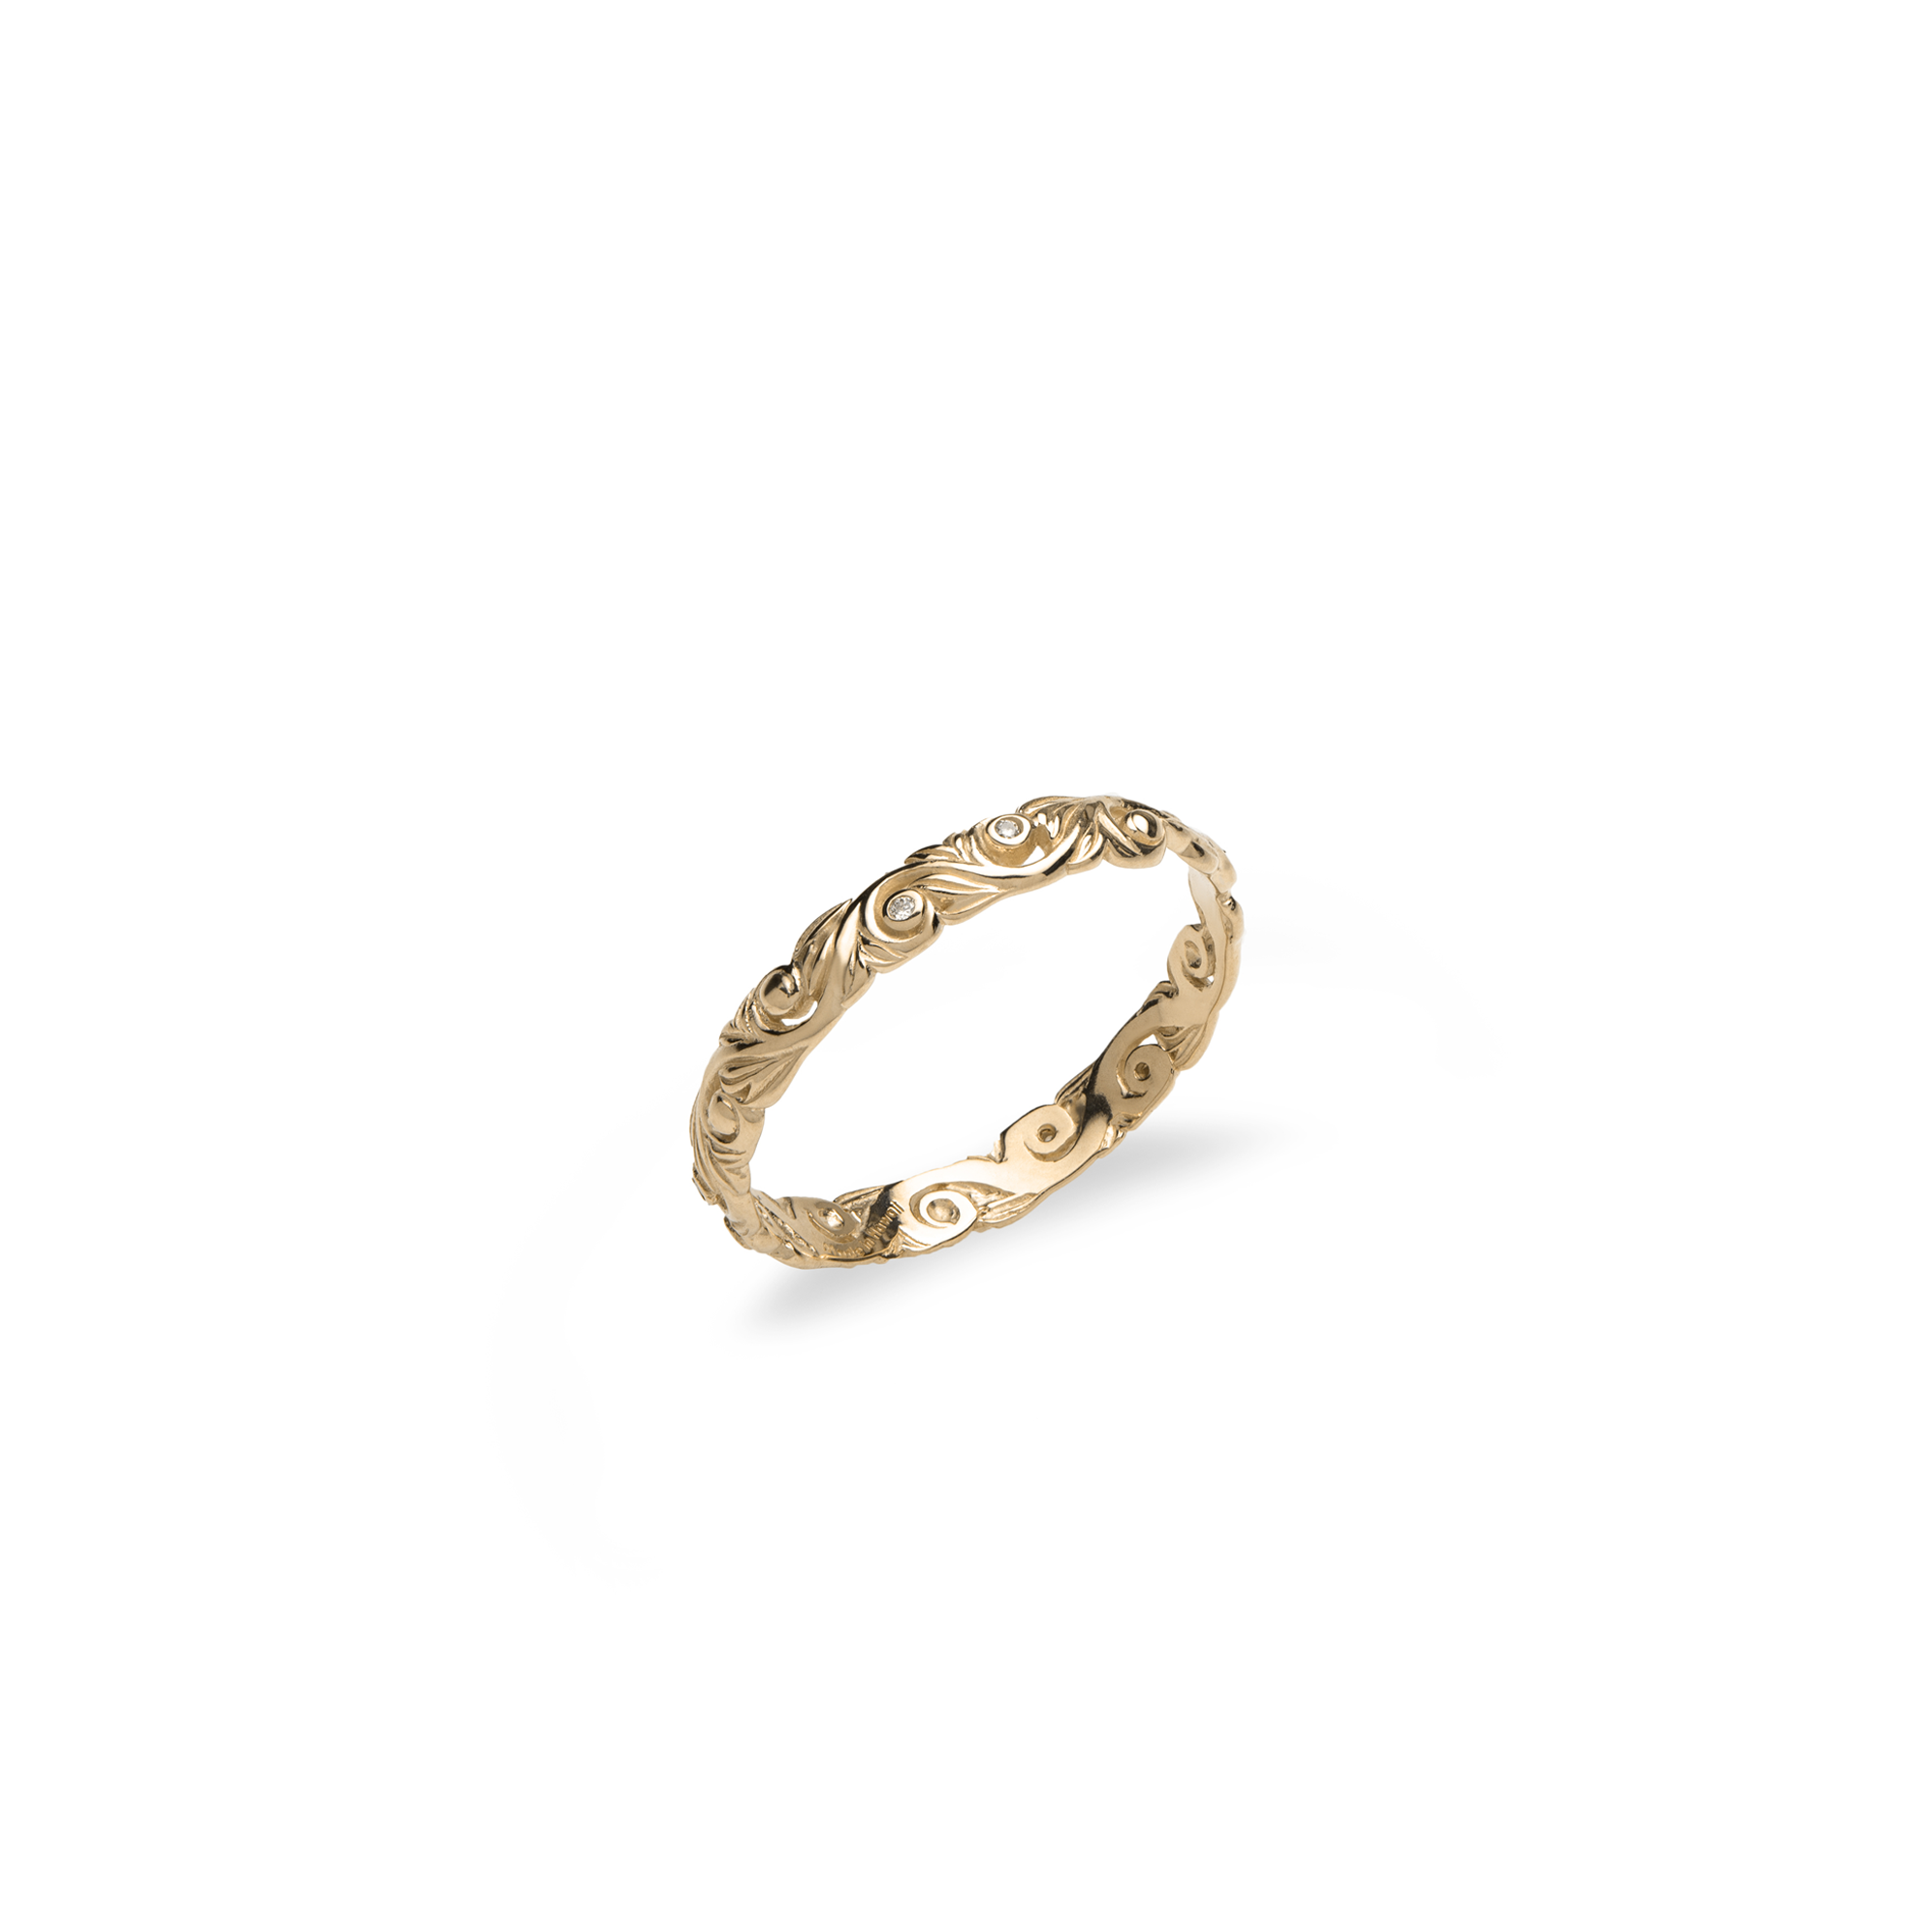 Living Heirloom Ring in Gold with Diamonds - 3mm